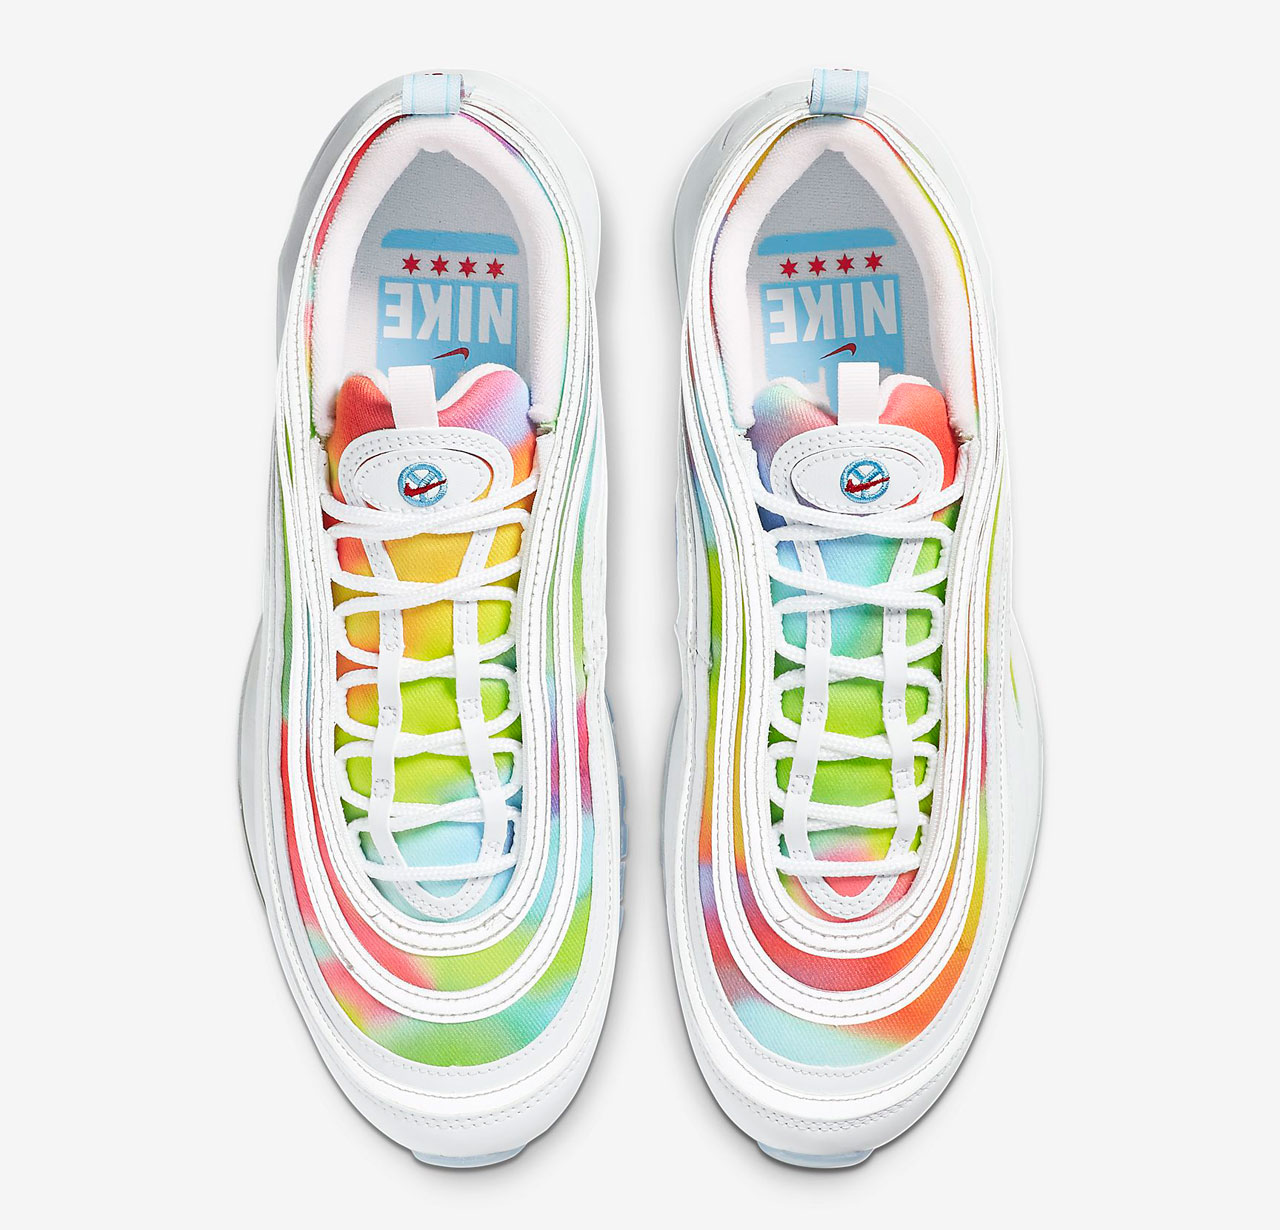 nike-air-max-97-tie-dye-chicago-where-to-buy-2